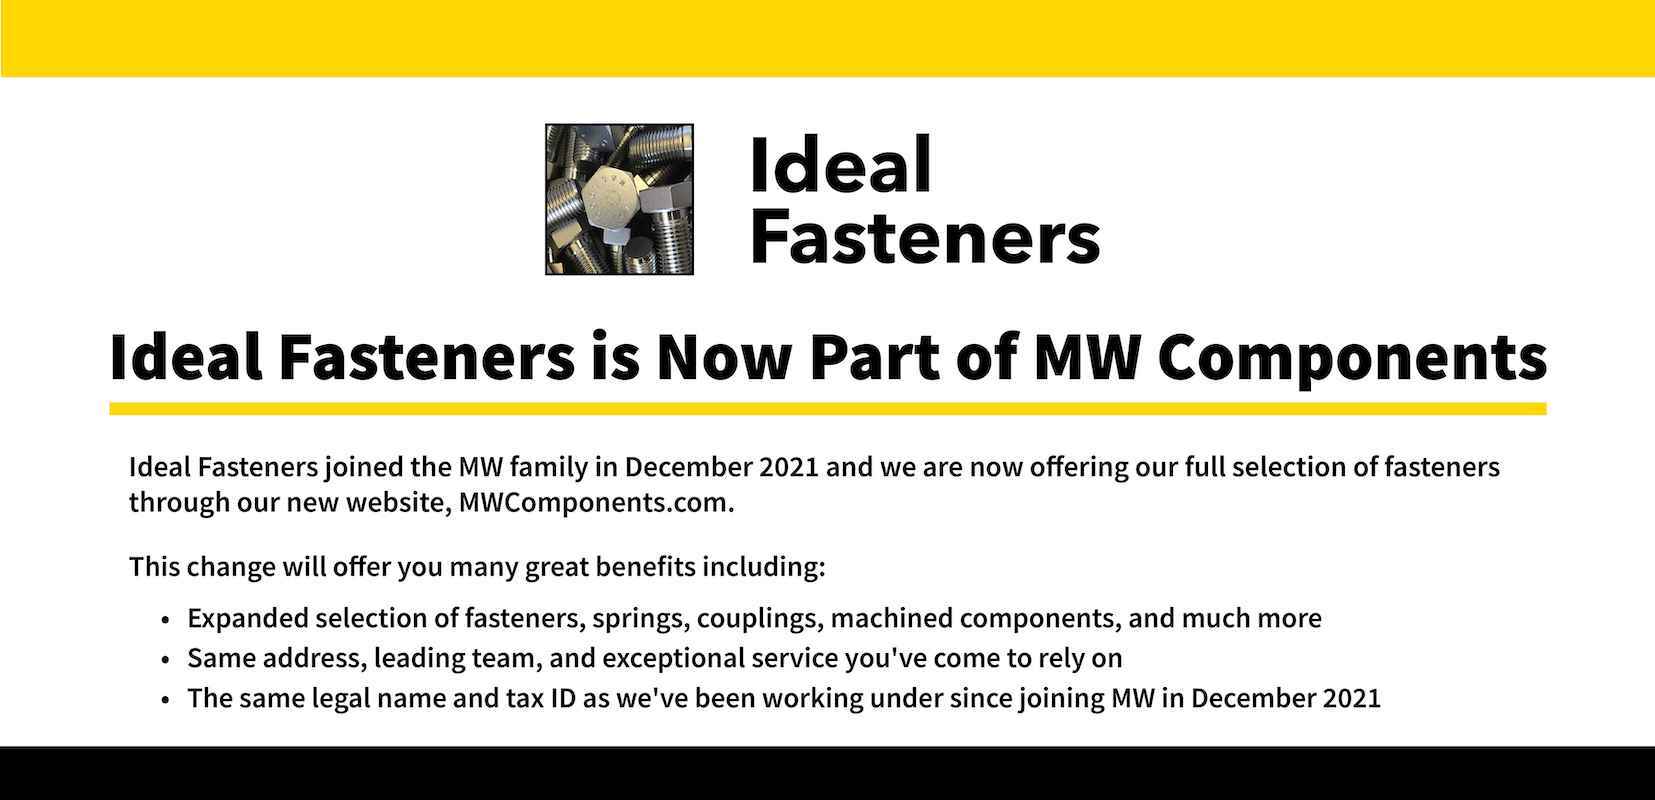 Ideal Fasteners is now part of MW Components